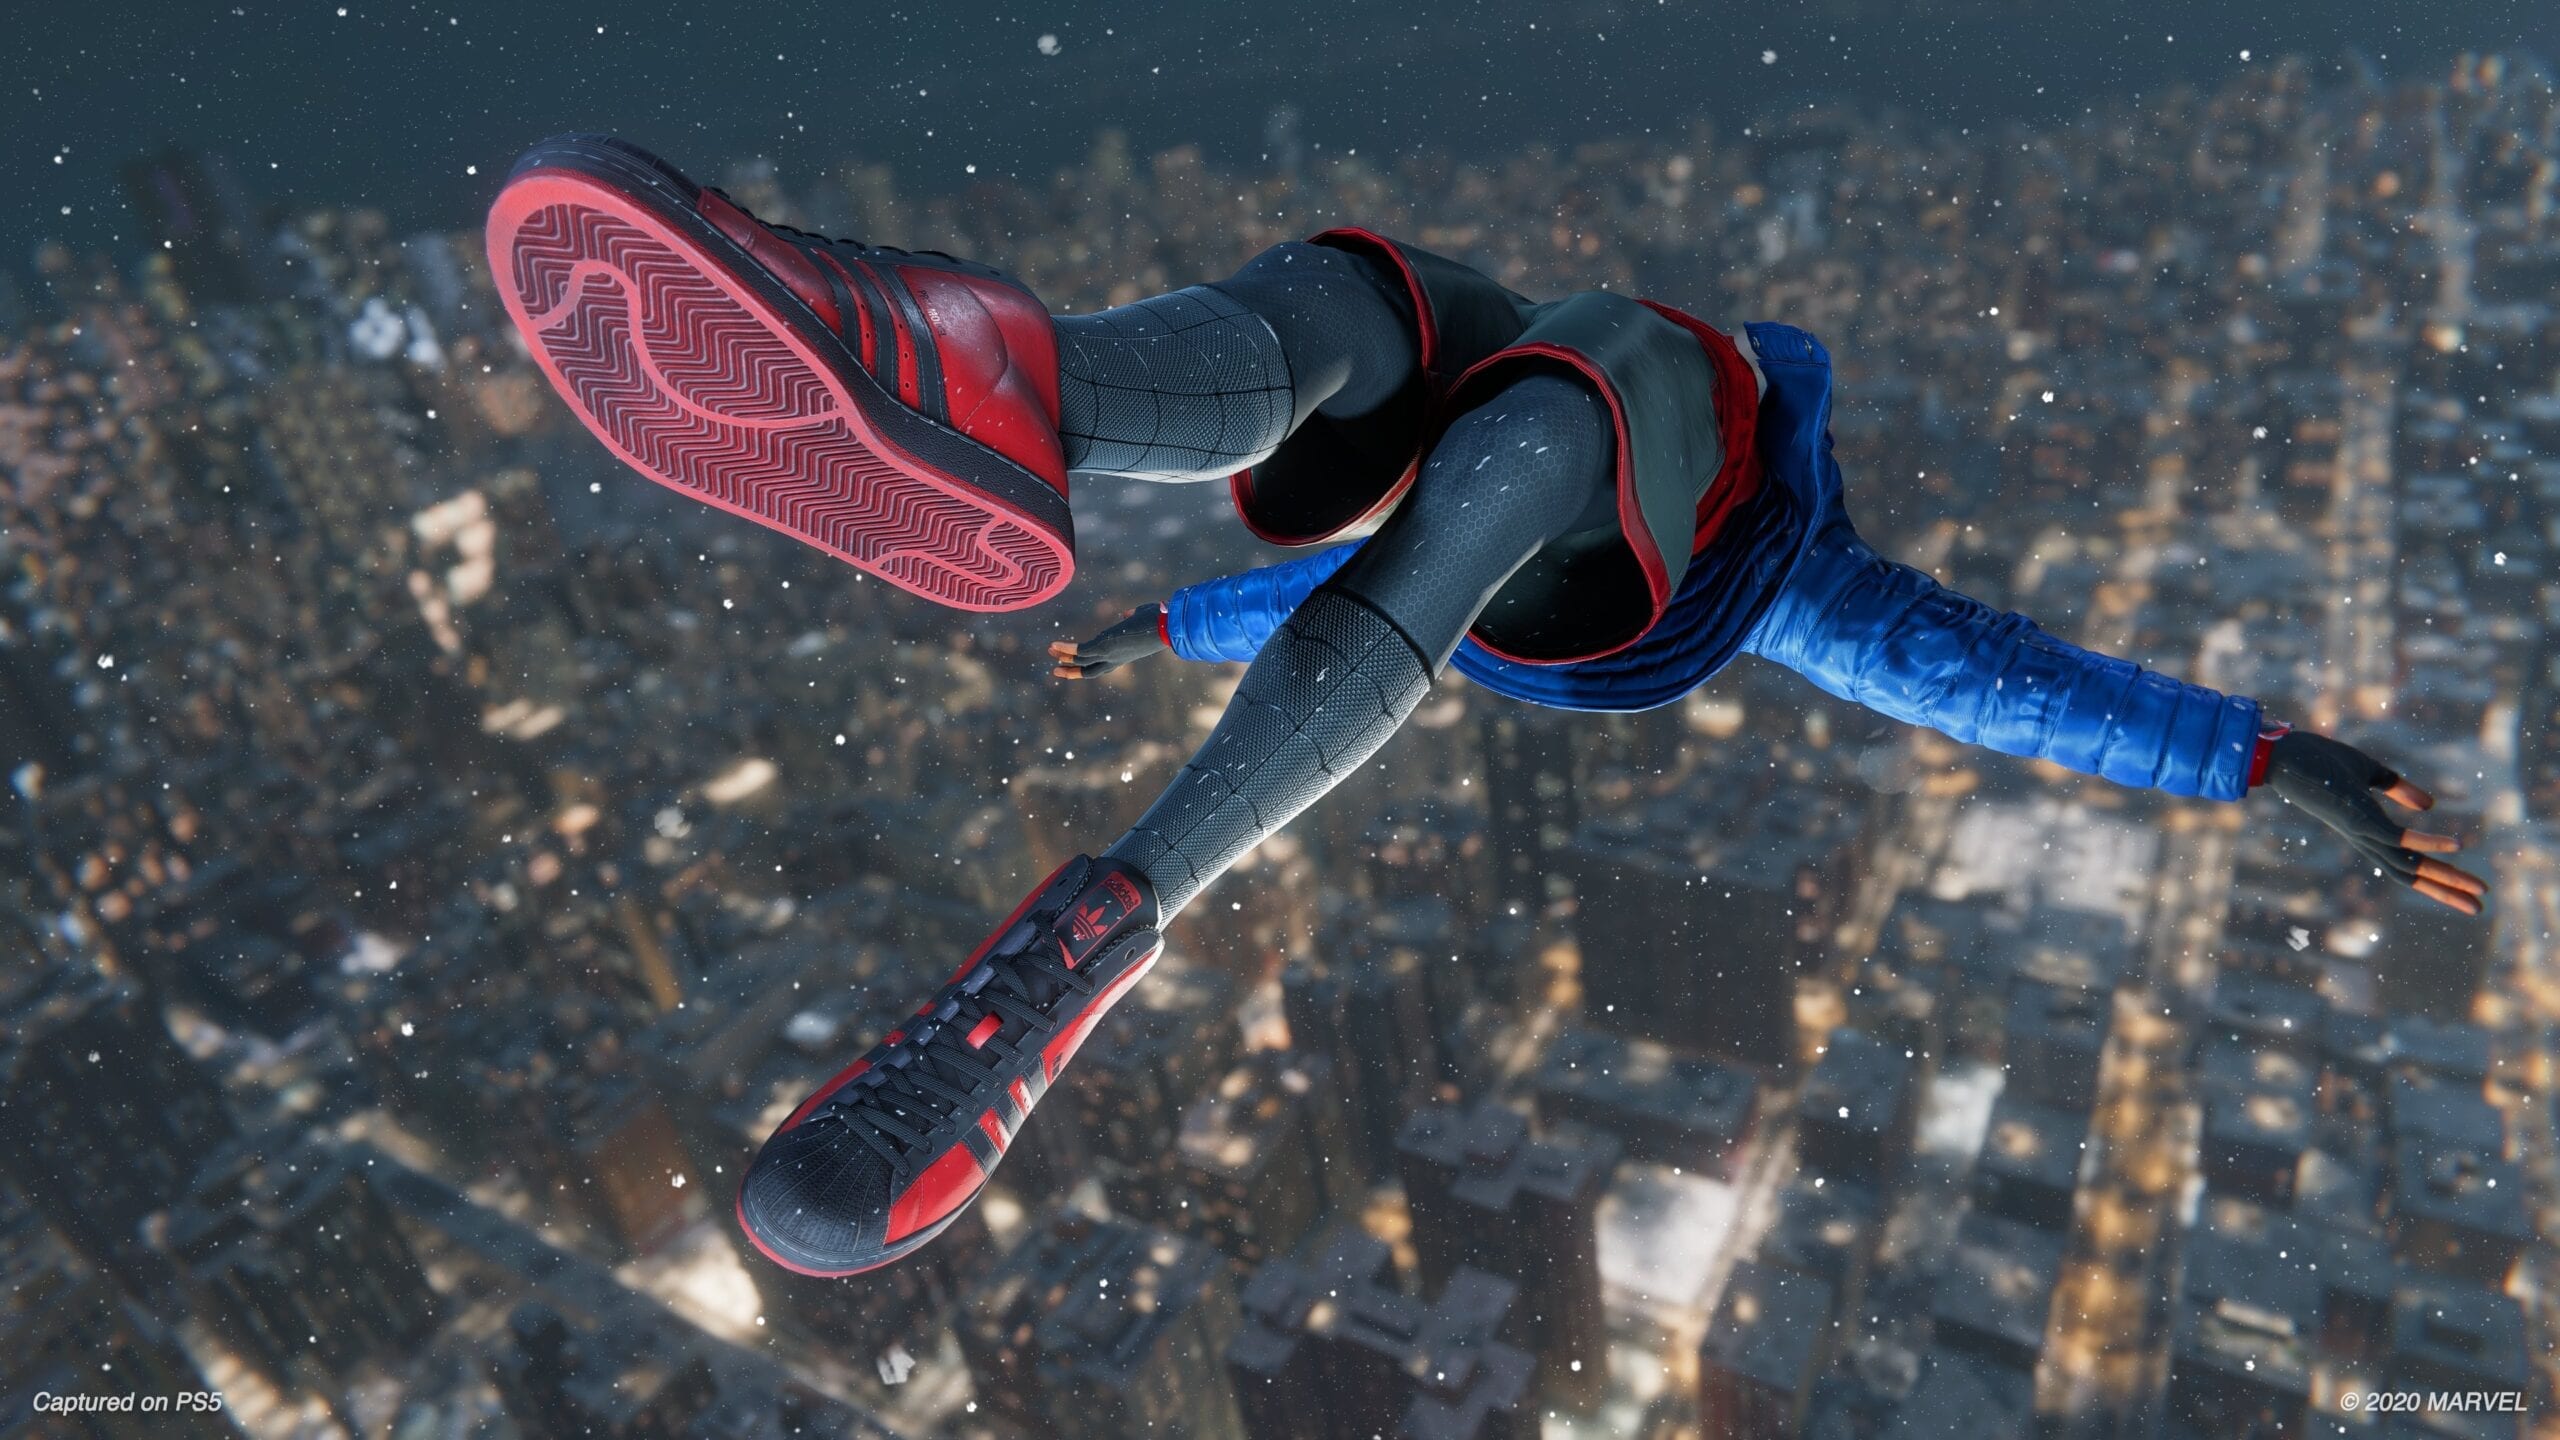 Insomniac & Adidas Team Up To Release Miles Morales Sneakers